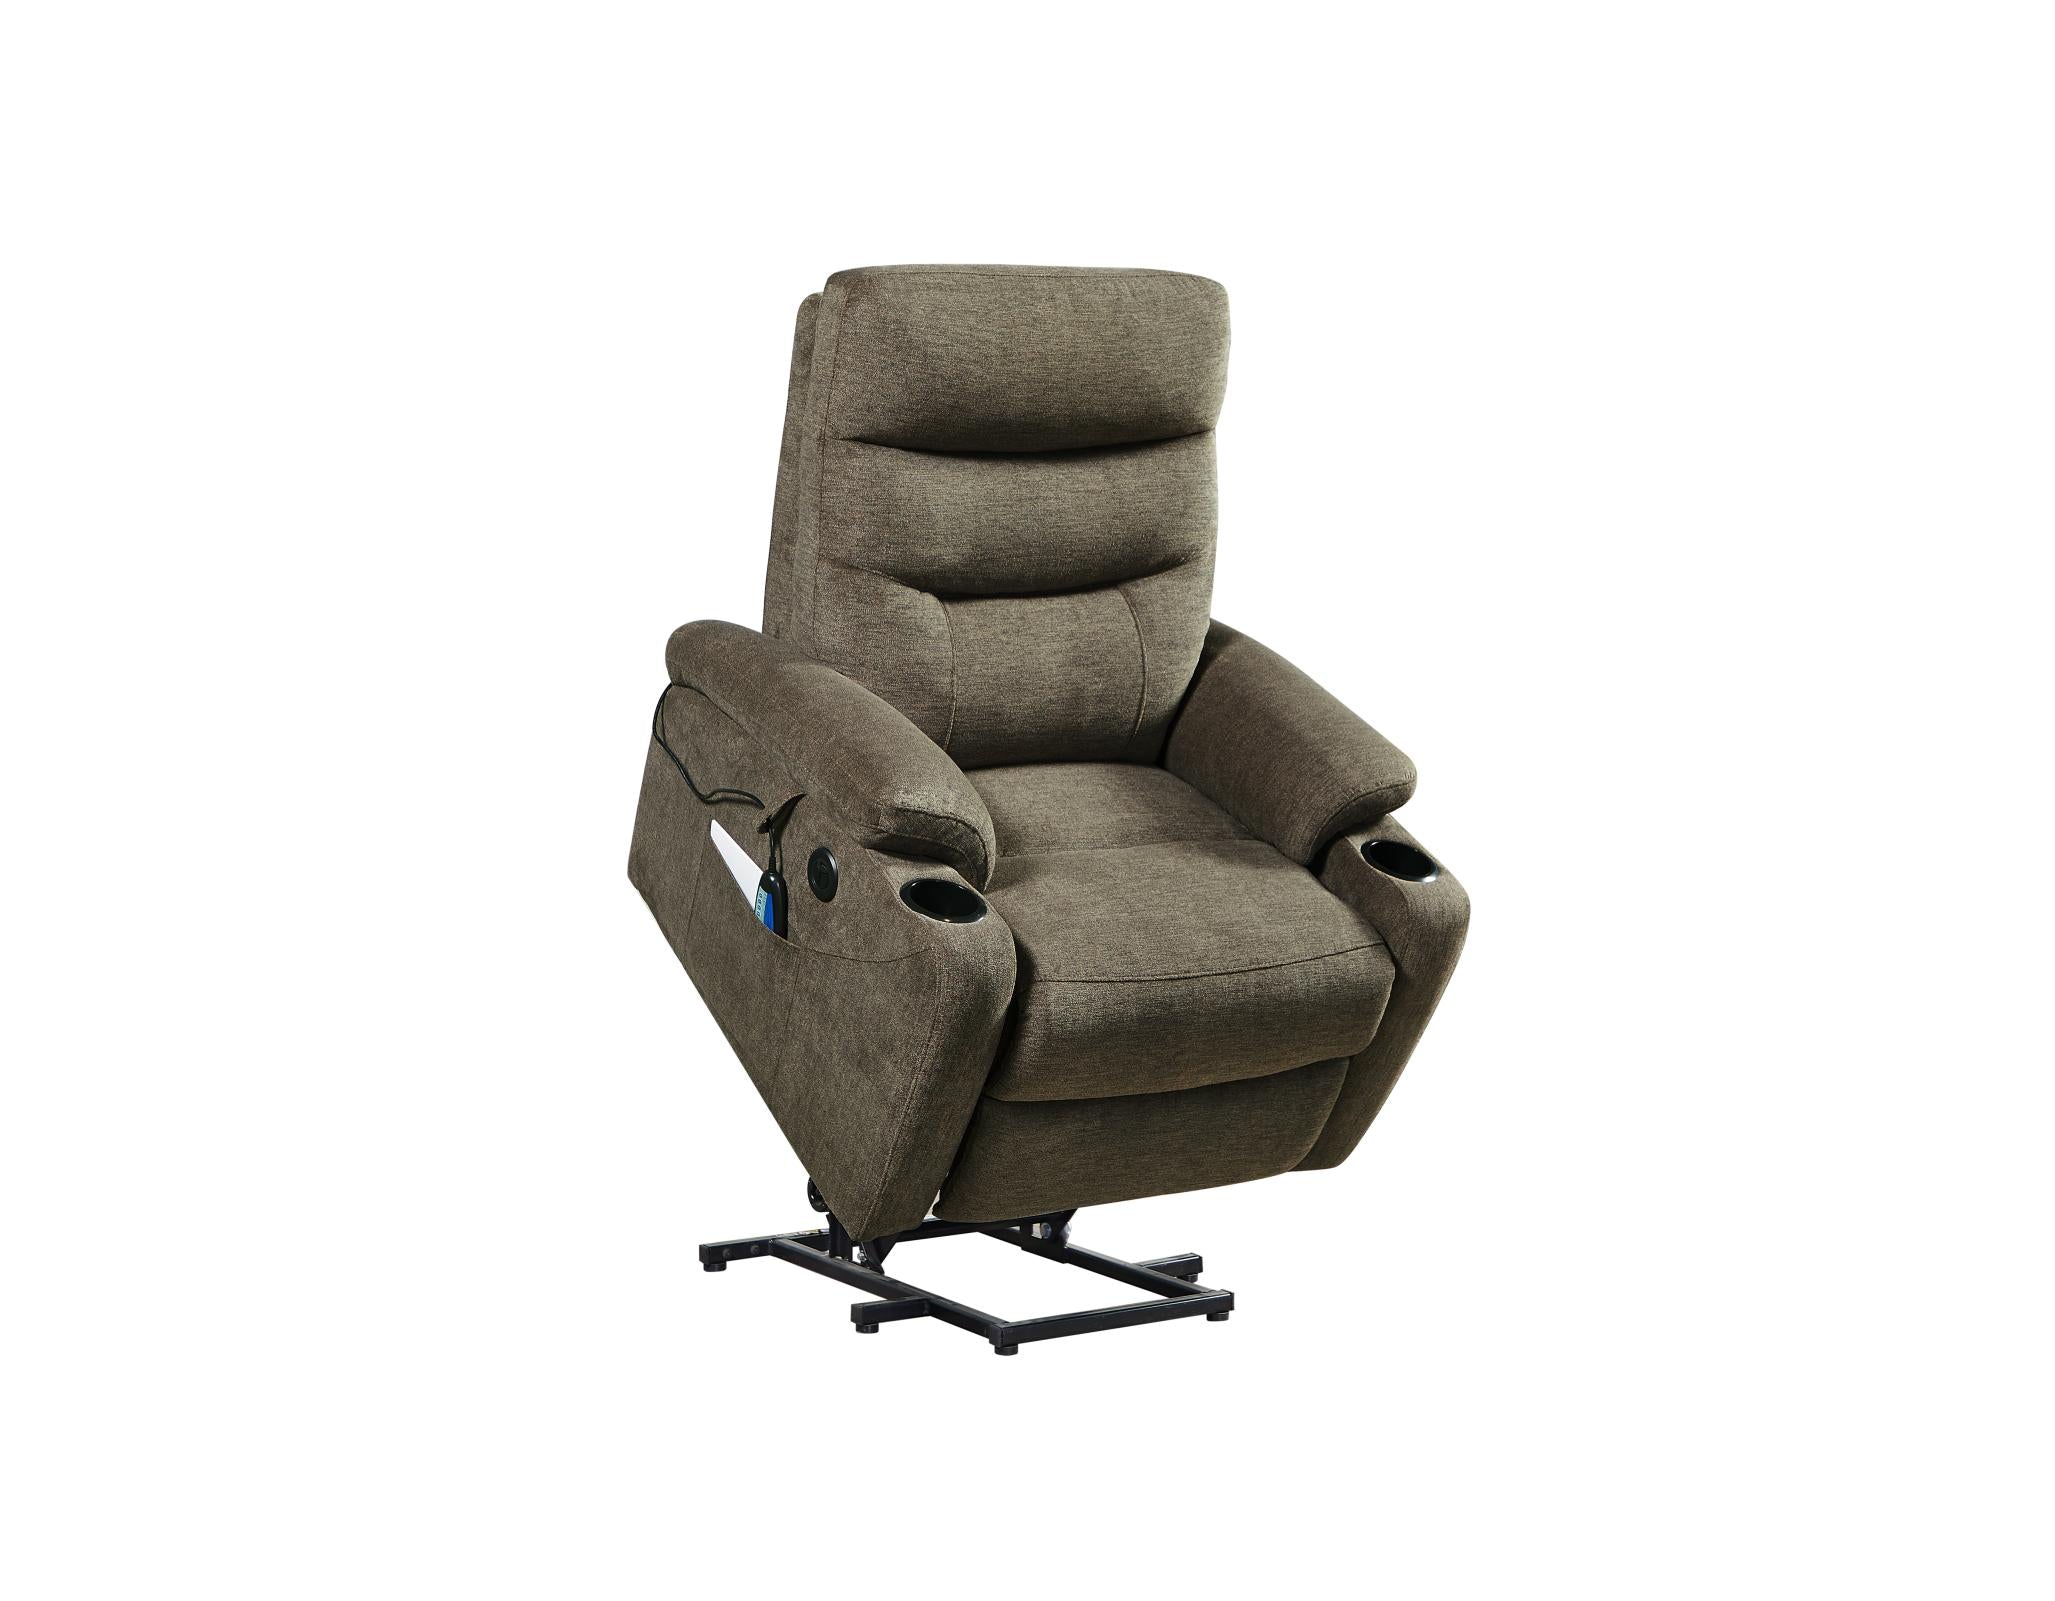 Massage heating electric lift-up chair